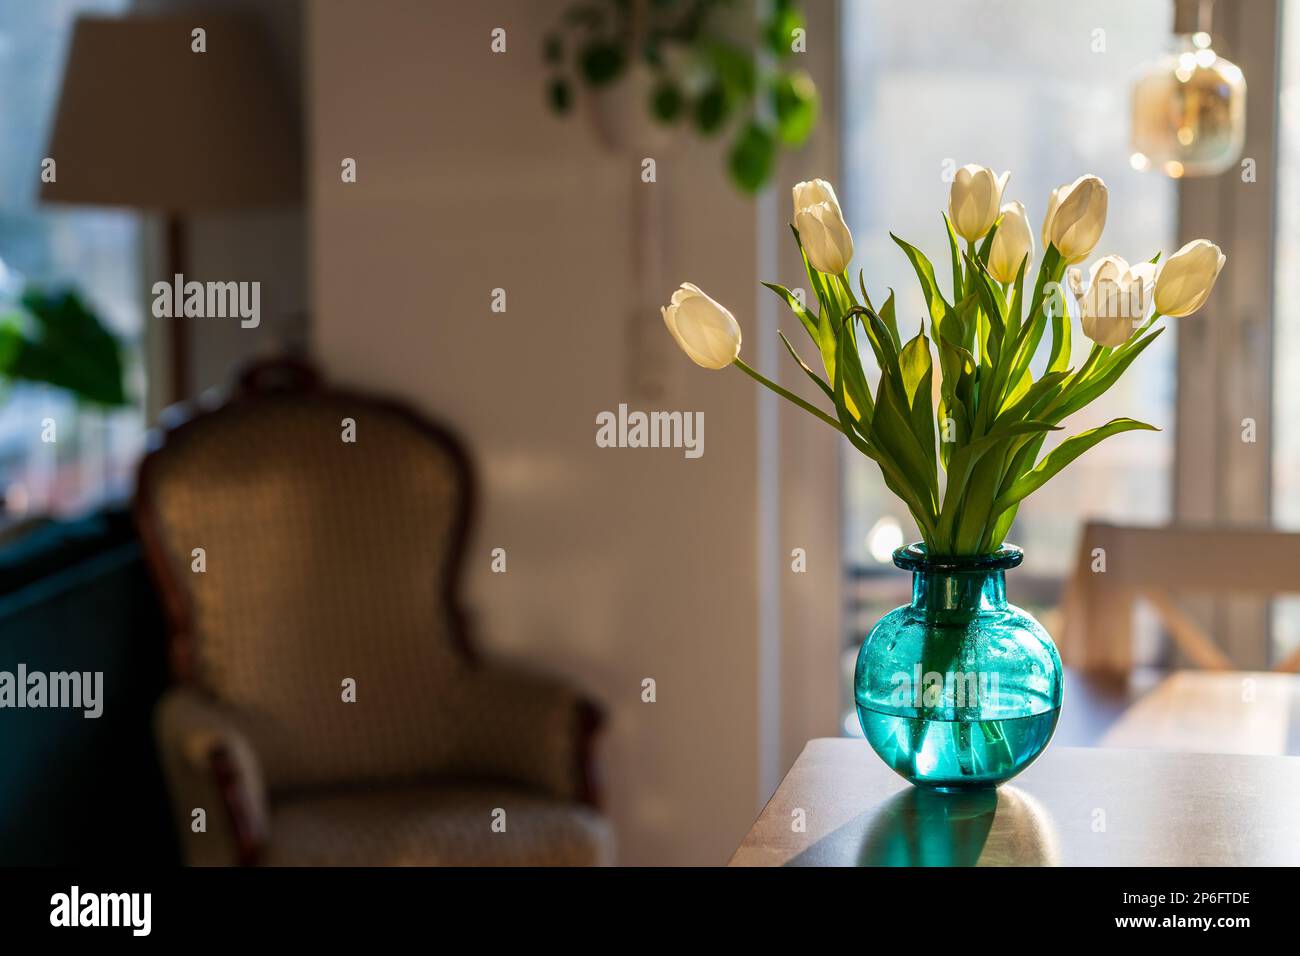 A bouquet of white tulips in a blue green glass vase in bright morning sun. Modern interior design, fresh spring flowers in a cozy living room. Stock Photo